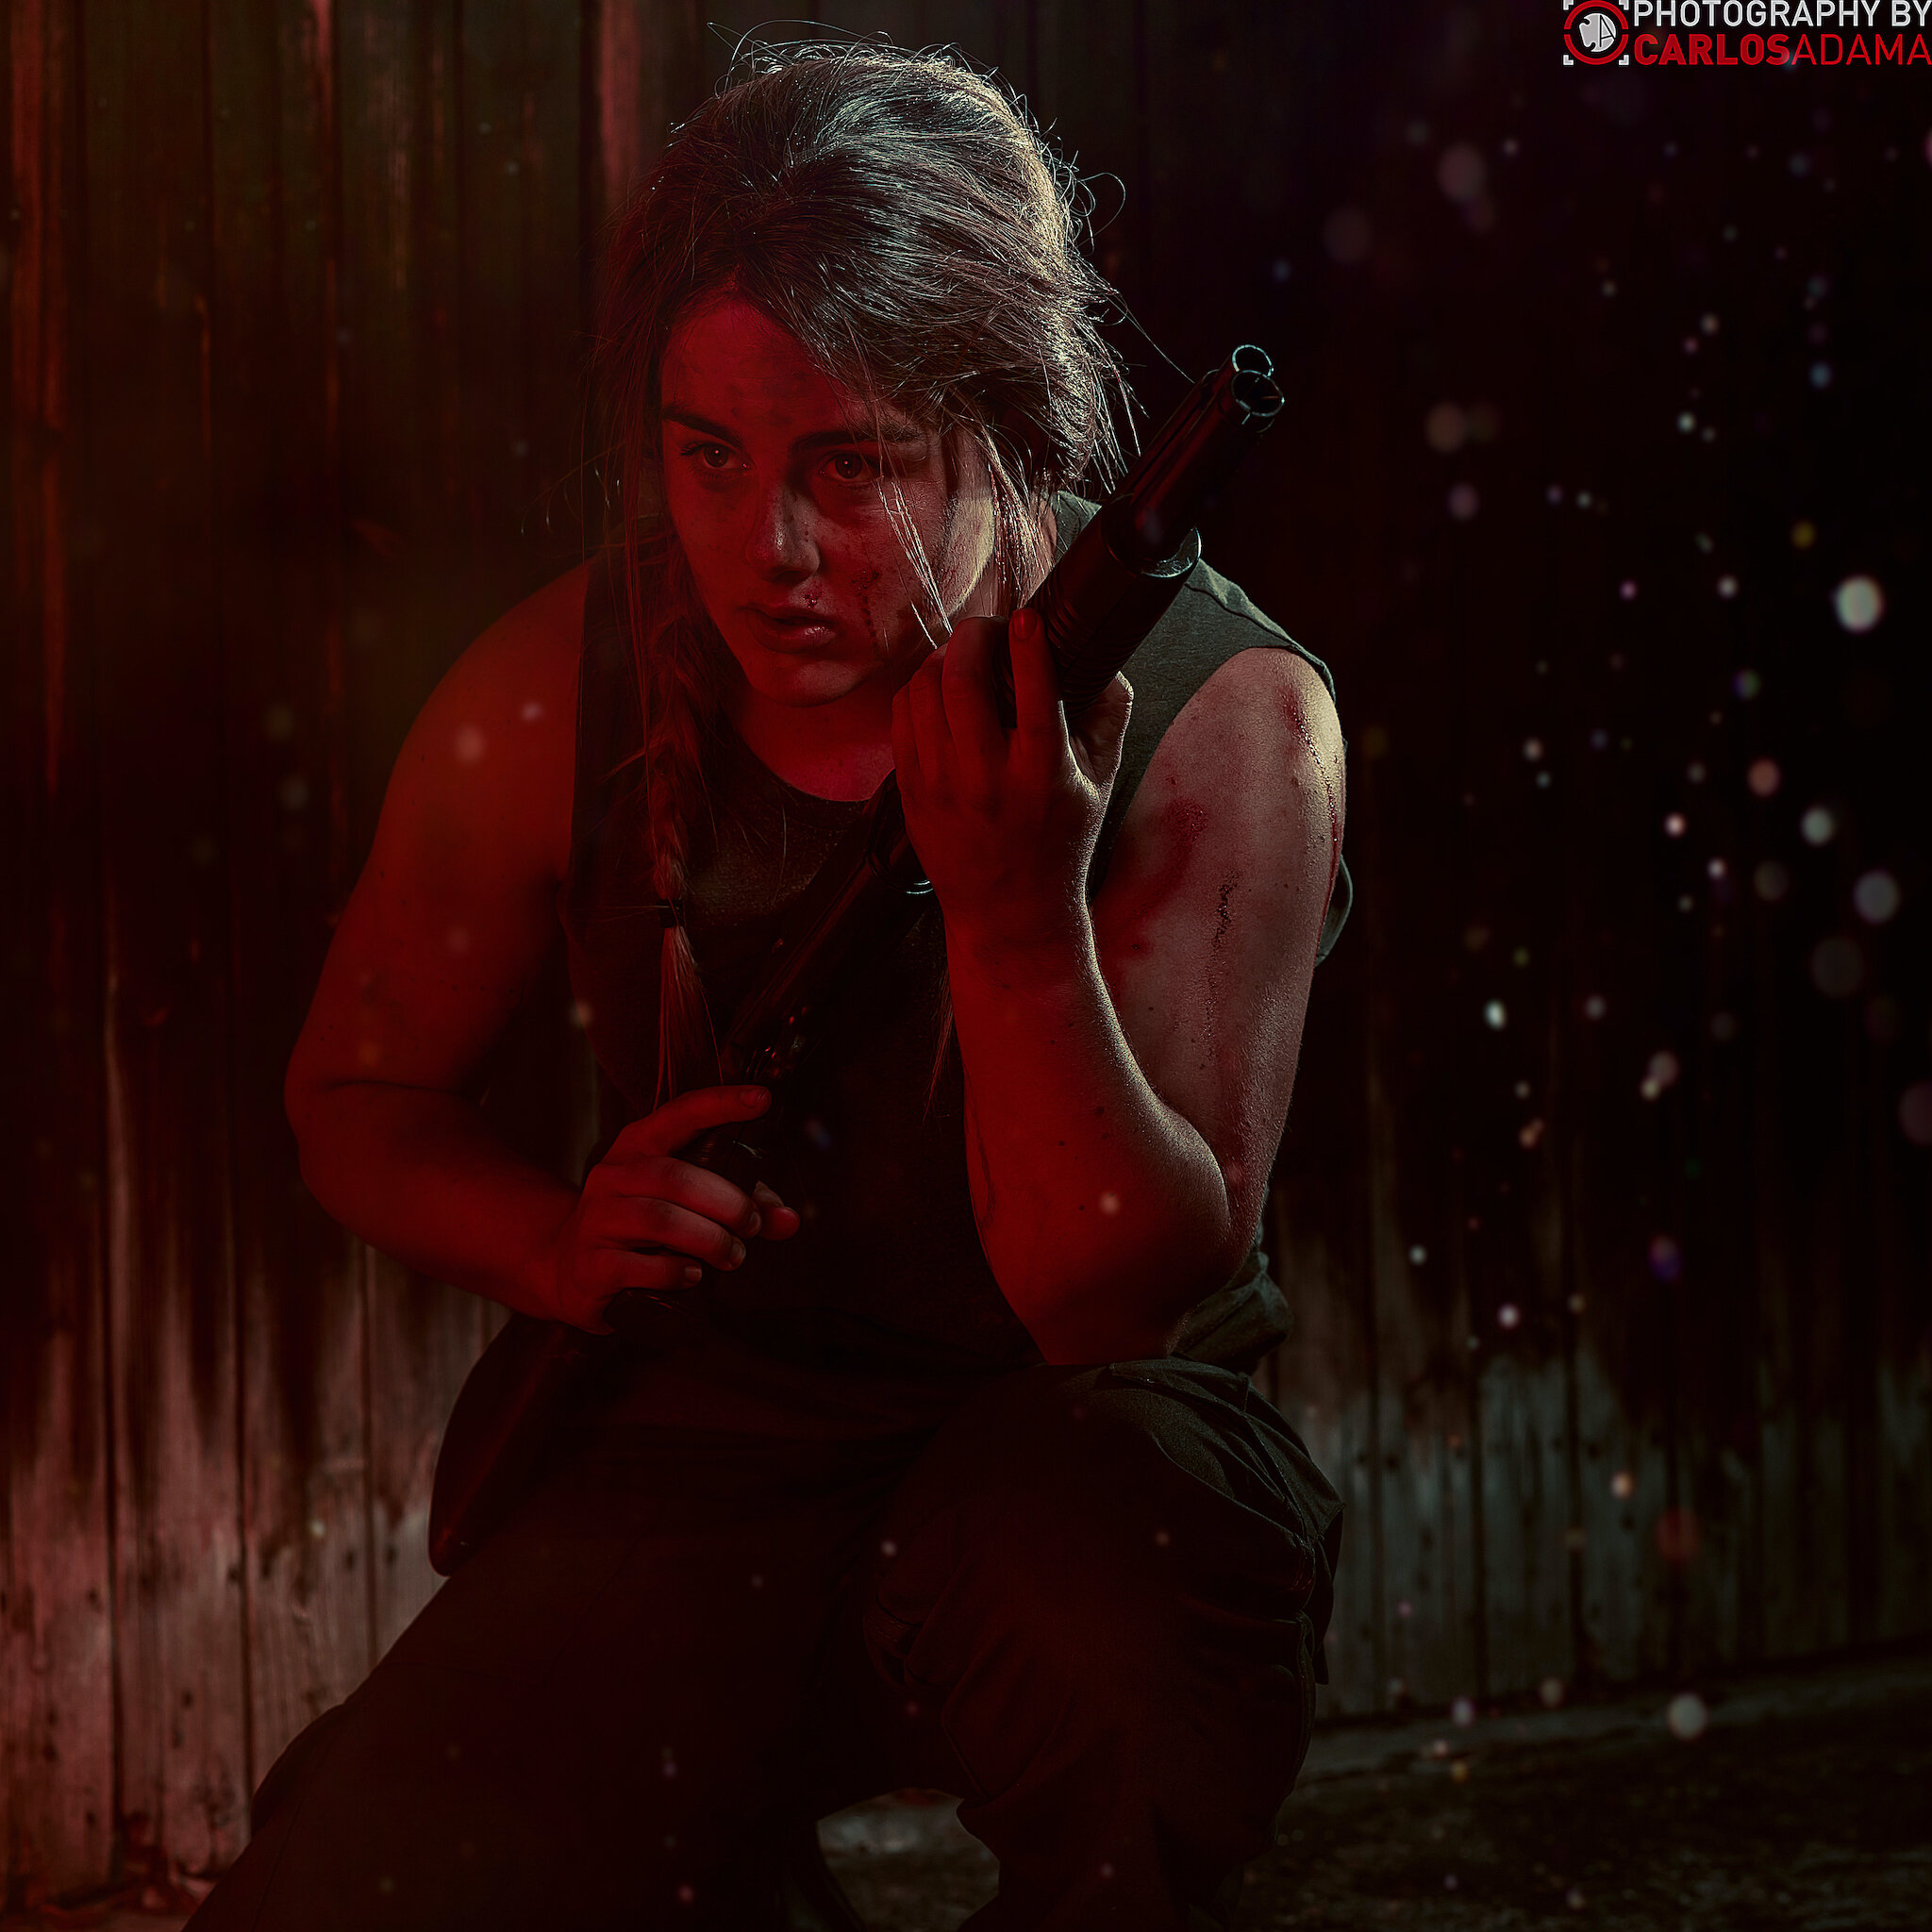 More from The Last of Us - MsValentine's Cosplay